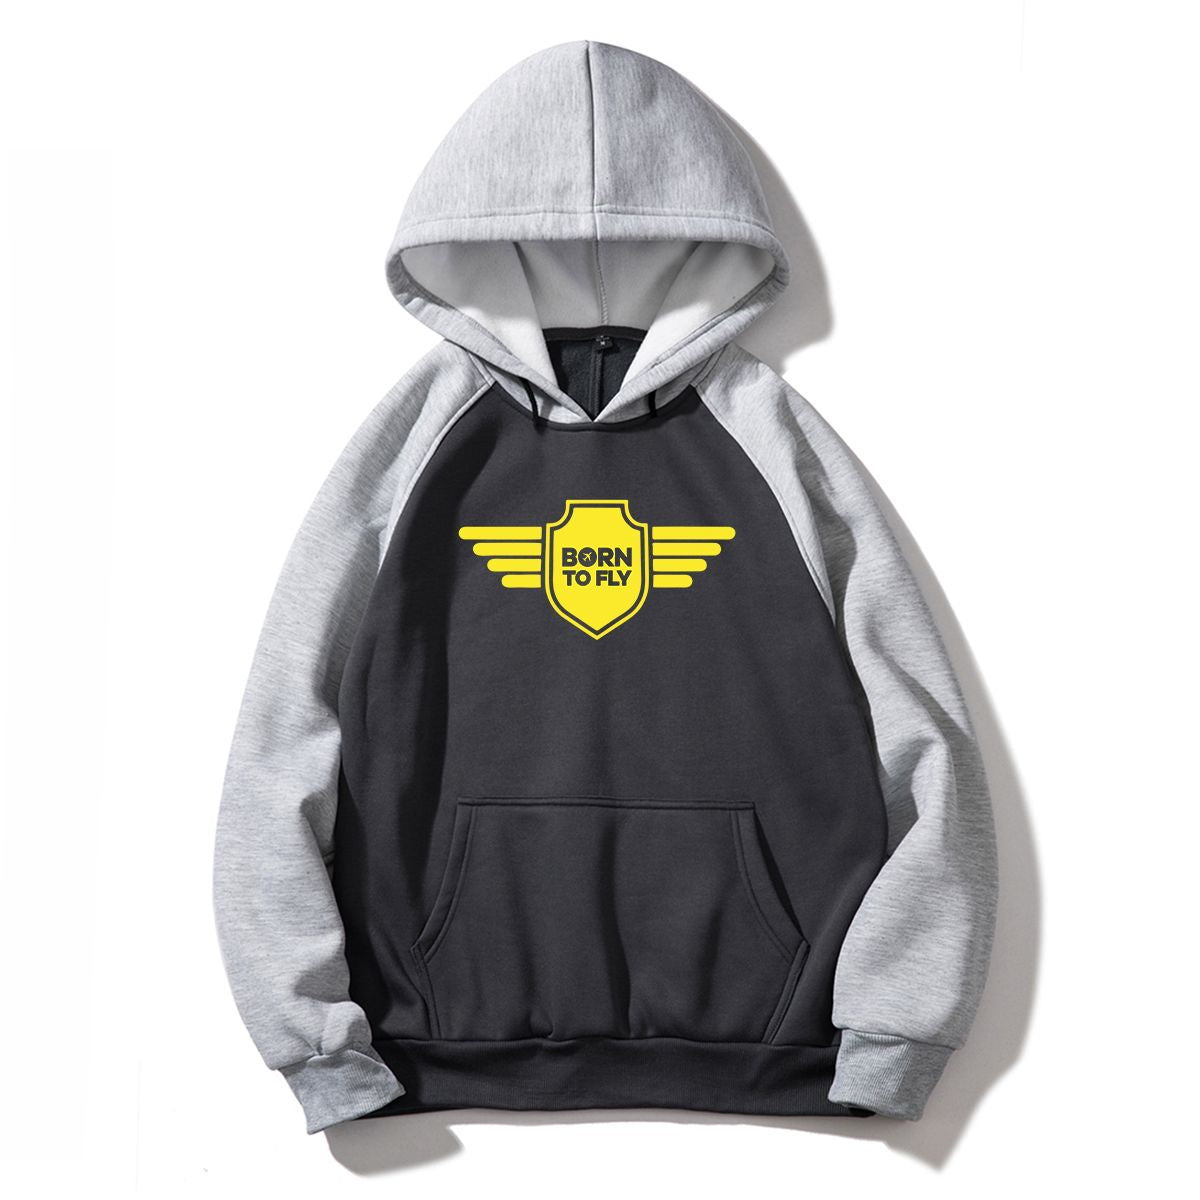 Born To Fly & Badge Designed Colourful Hoodies